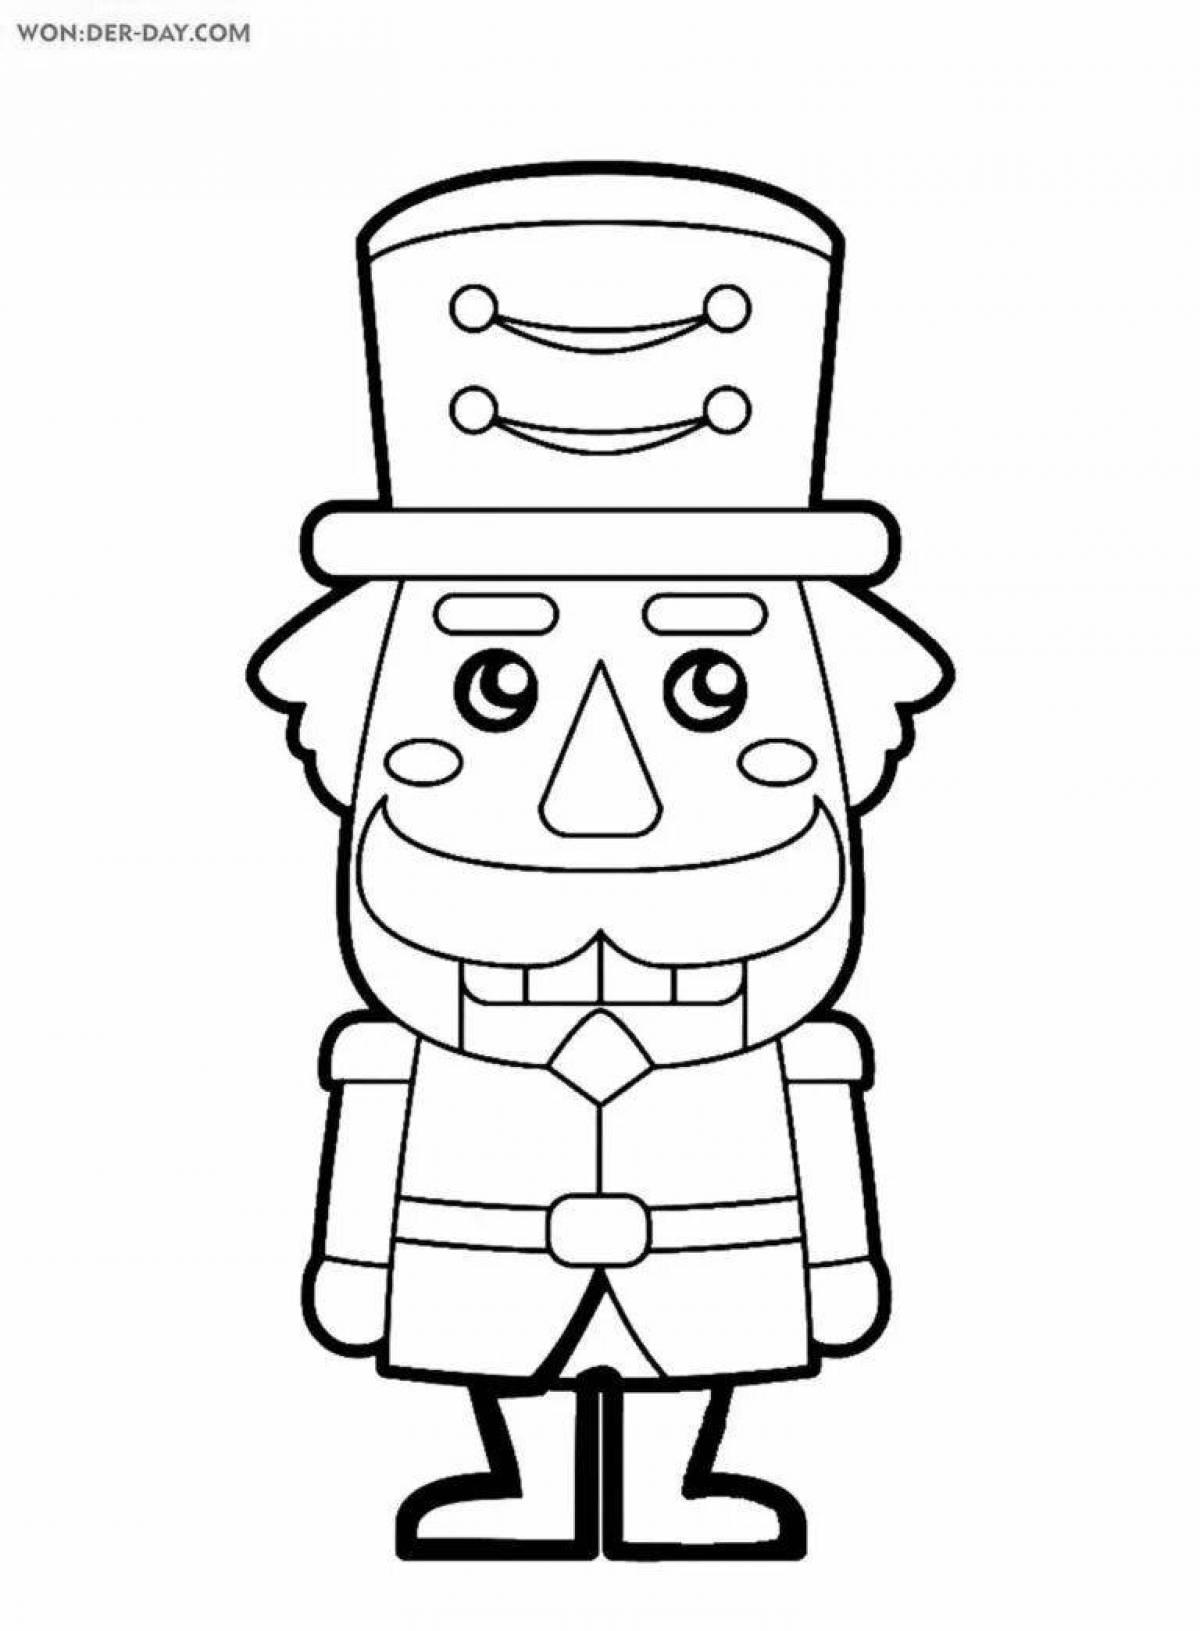 Coloring poster with glowing nutcracker